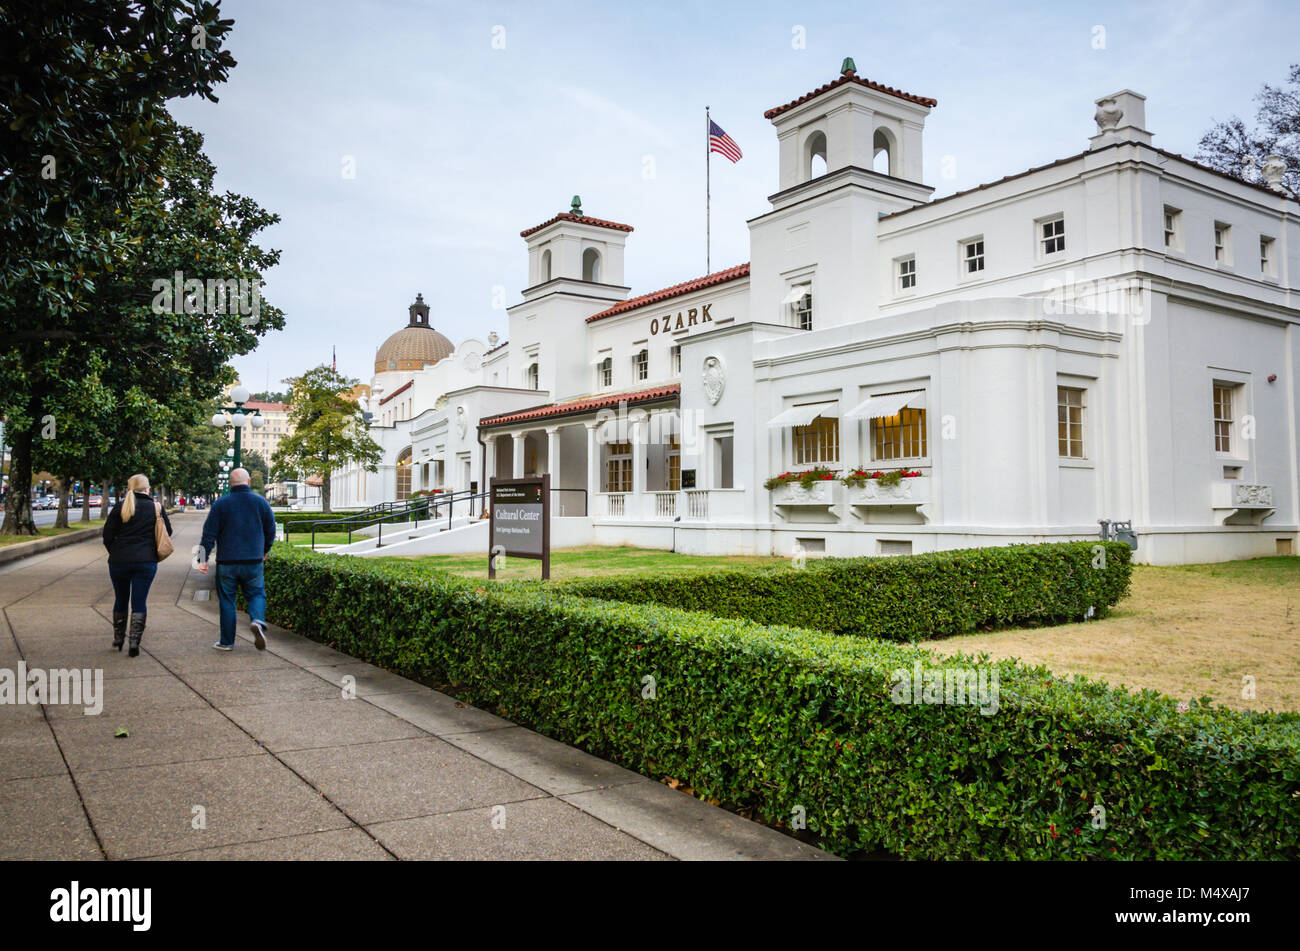 Bathhouse Row is a collection of bathhouses, associated buildings, and gardens located at Hot Springs National Park in the city of Hot Springs, Arkans Stock Photo